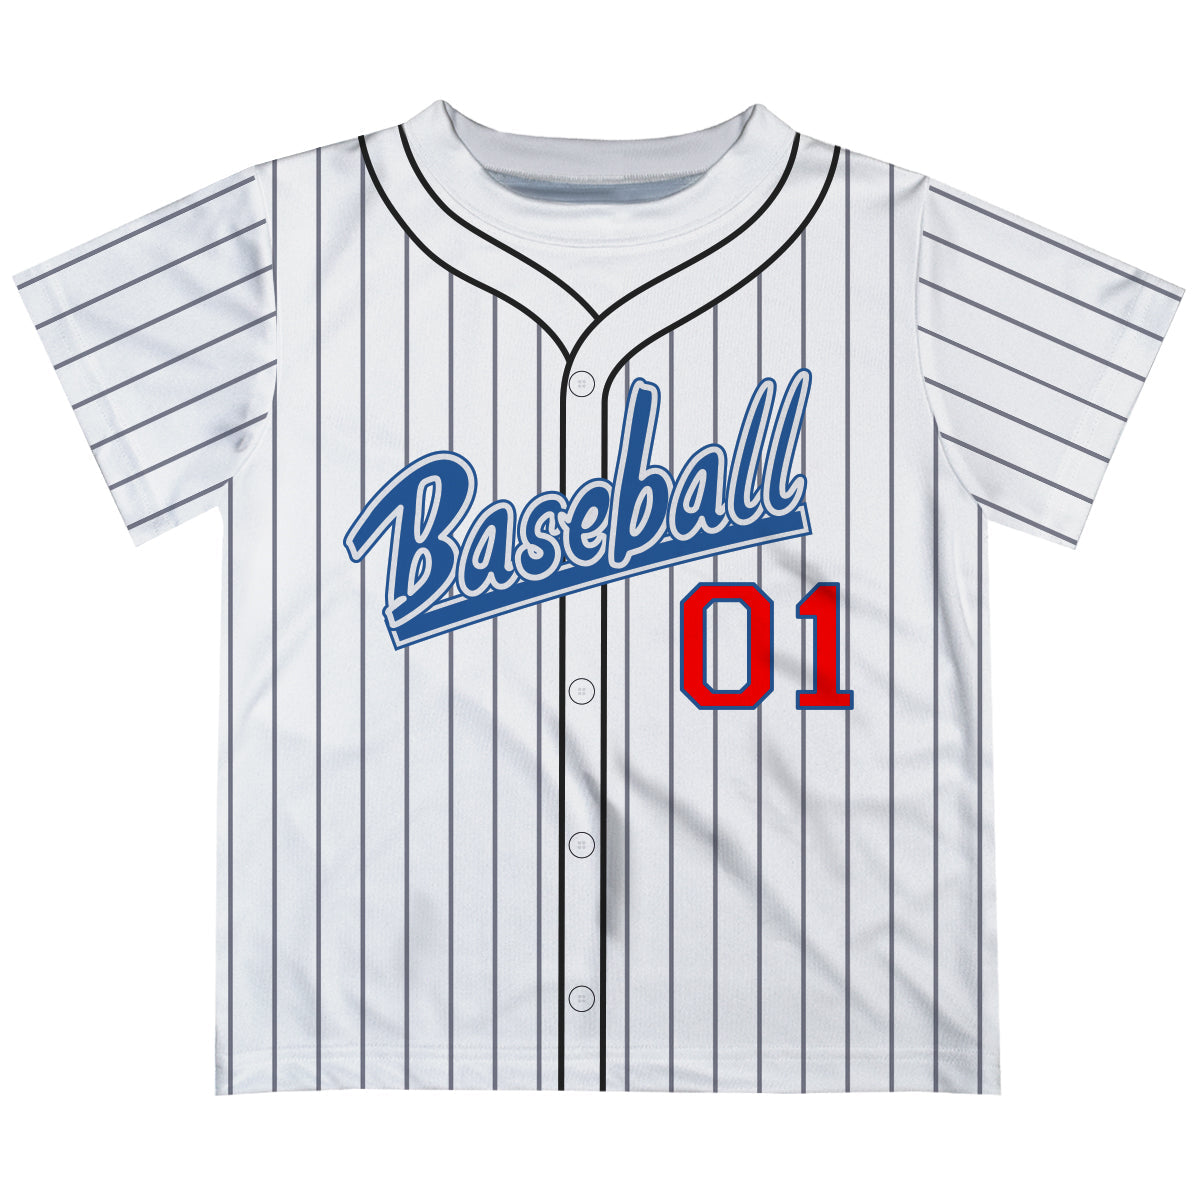 Baseball Personalized Name and Number White Gray Stripes Short Sleeve Tee Shirt